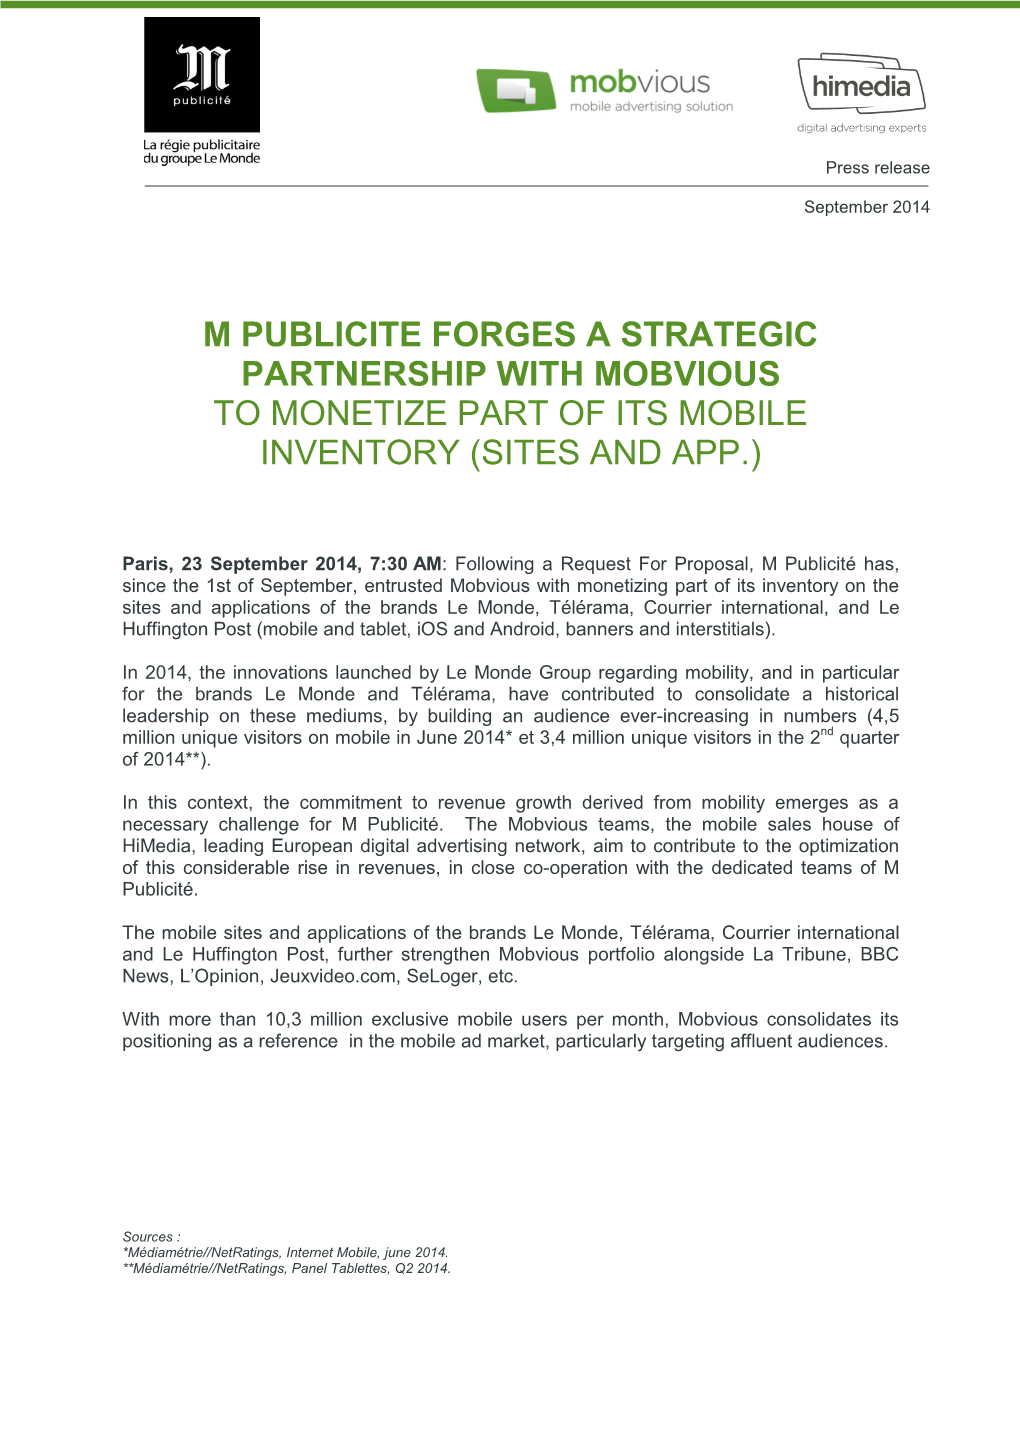 M Publicite Forges a Strategic Partnership with Mobvious to Monetize Part of Its Mobile Inventory (Sites and App.)